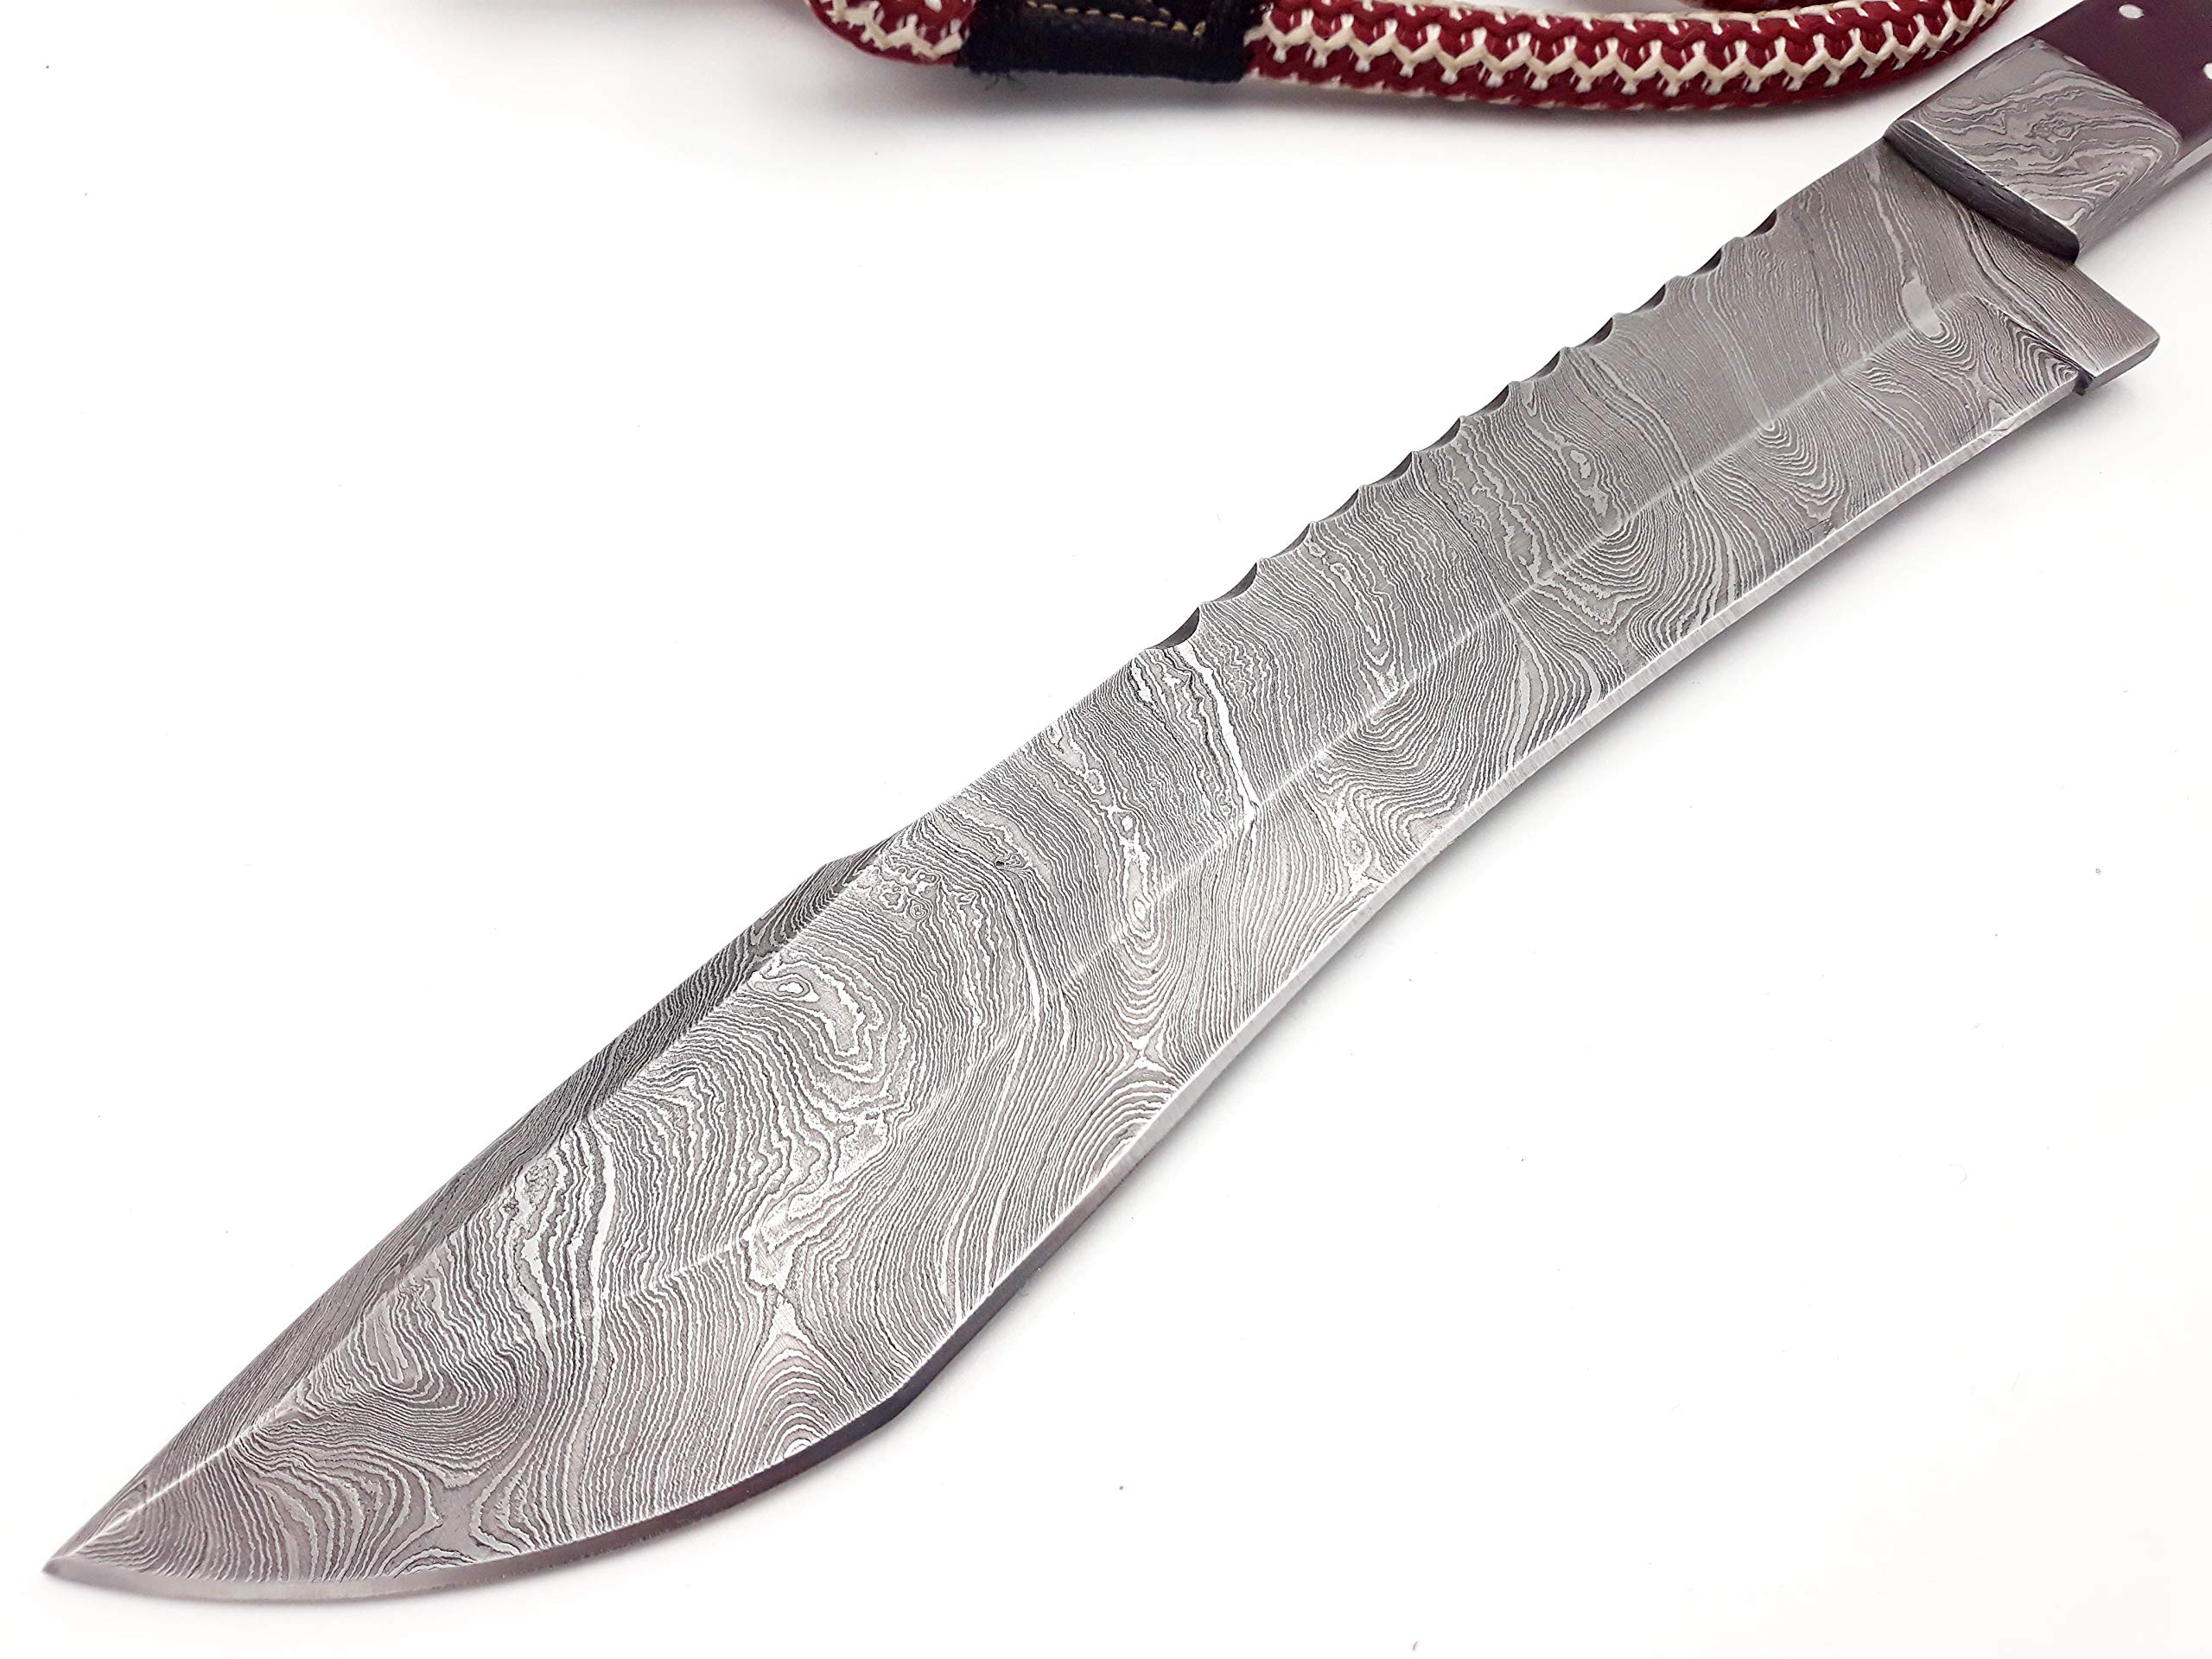 Nooraki-57 Premium Quality Outdoor/Survival/Hunting Knife - Damascus Steel 256 Layers with Genuine Leather Sheath 15 inch Full Tang